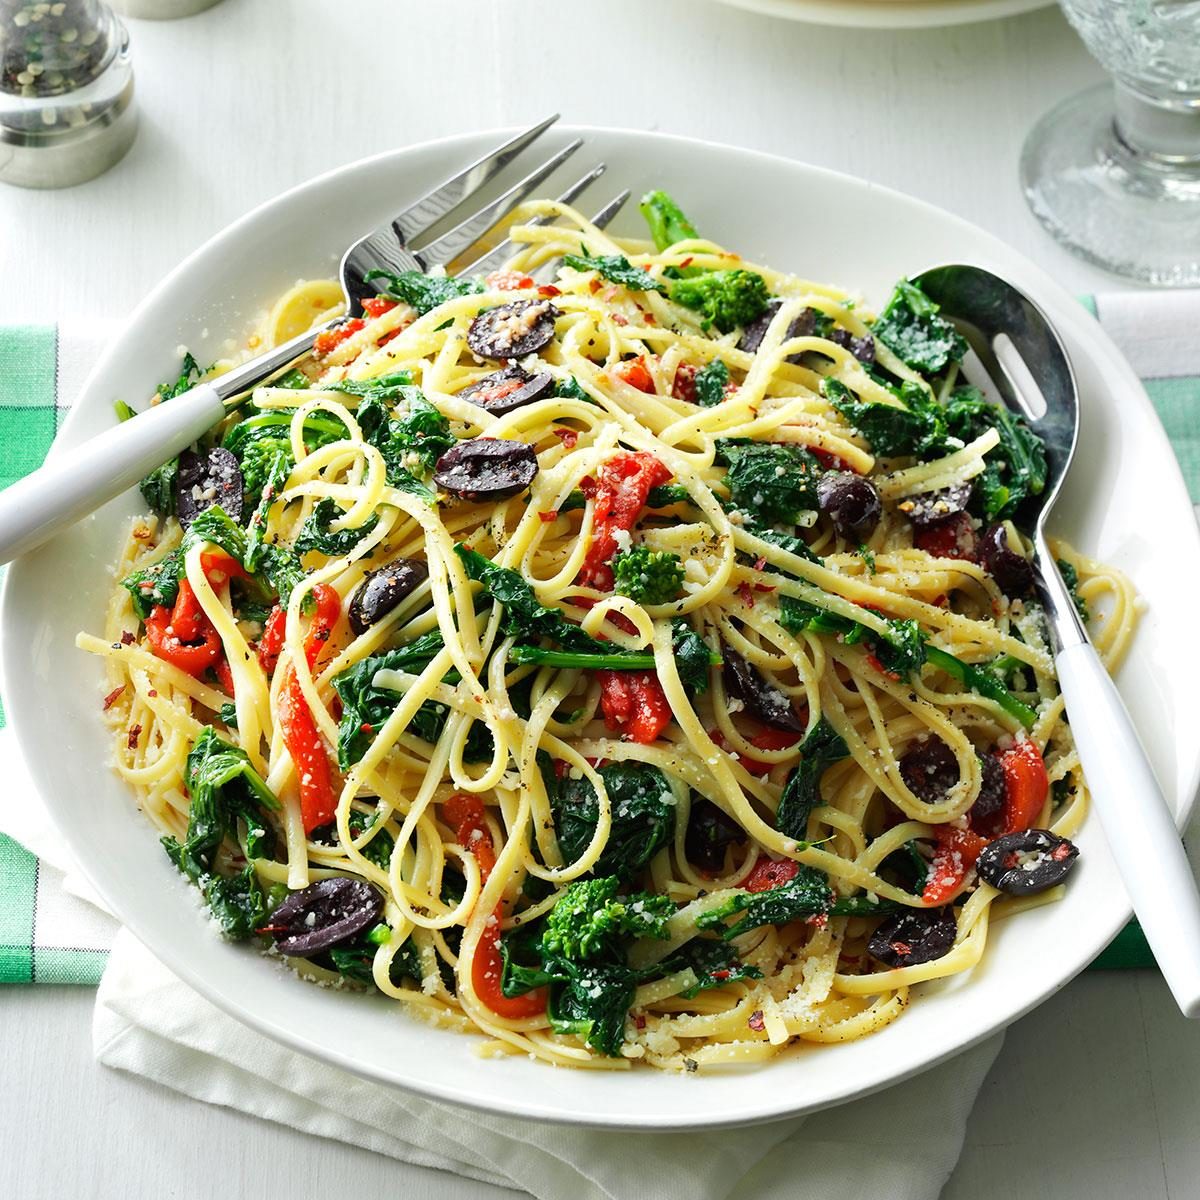 Wednesday: Linguine with Broccoli Rabe & Peppers